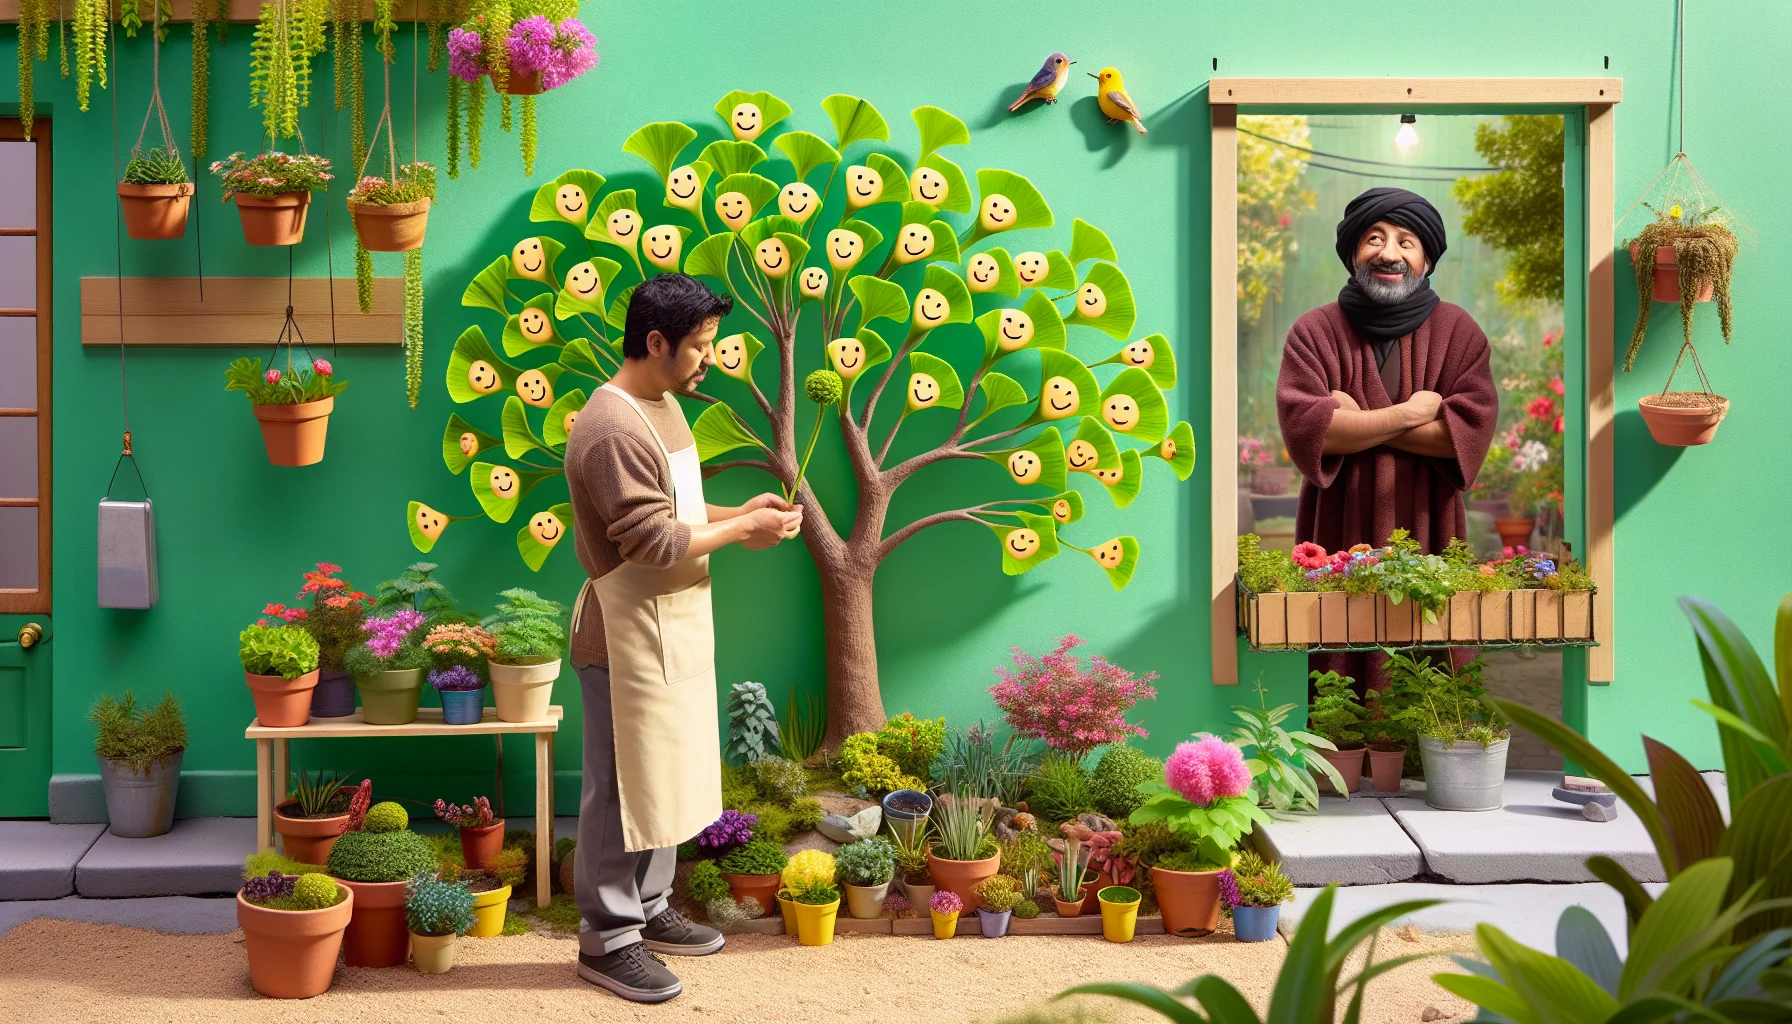 Craft a humorous and enticing real-world scenario featuring a dedicated Hispanic female gardener and a Middle-Eastern male passerby. The woman is carefully tending to a ginkgo biloba tree in her lush garden setting filled with colorful variety of plants. The passerby watches in fascination as the leaves of the ginkgo biloba tree magically turn into small smiling faces, coaxing an unexpected laugh from him. This whimsical scene is designed to evoke a desire for gardening and the joy it brings.